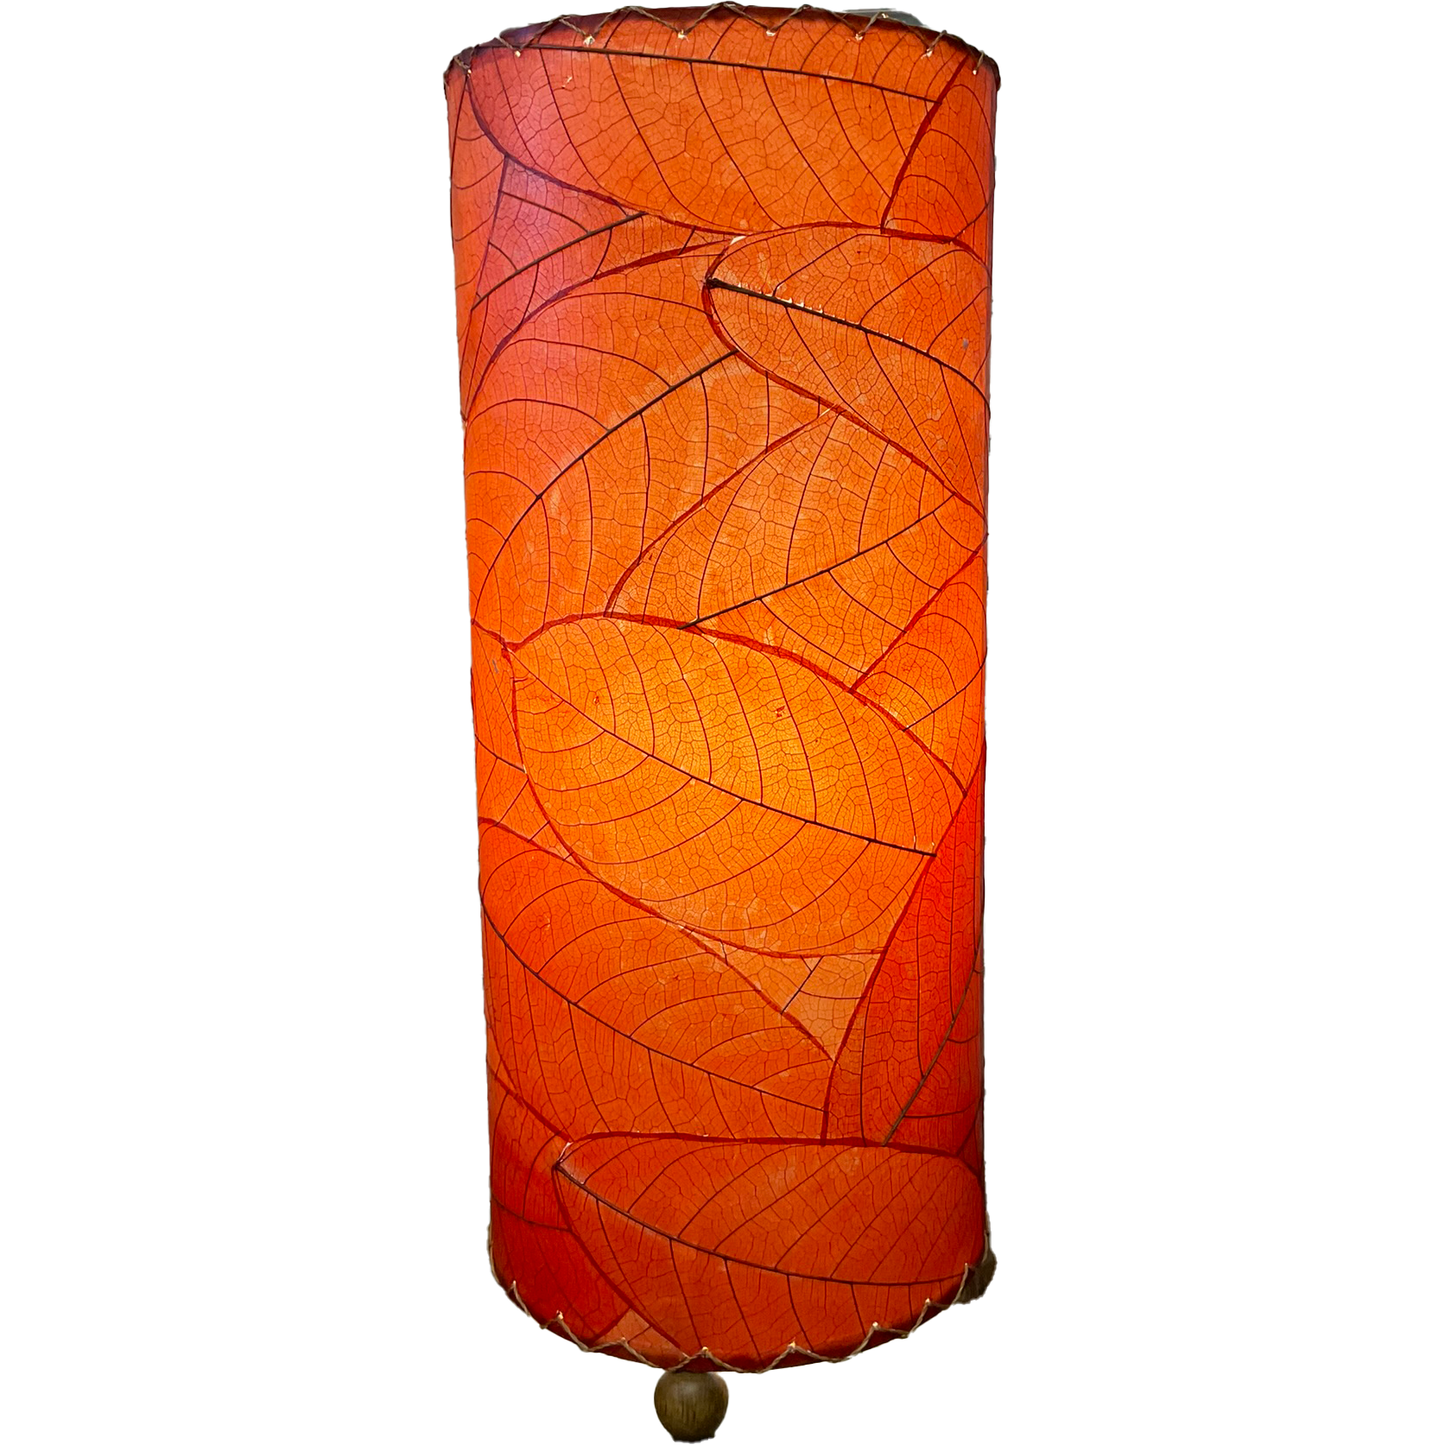 Leaf lamps (3 styles)